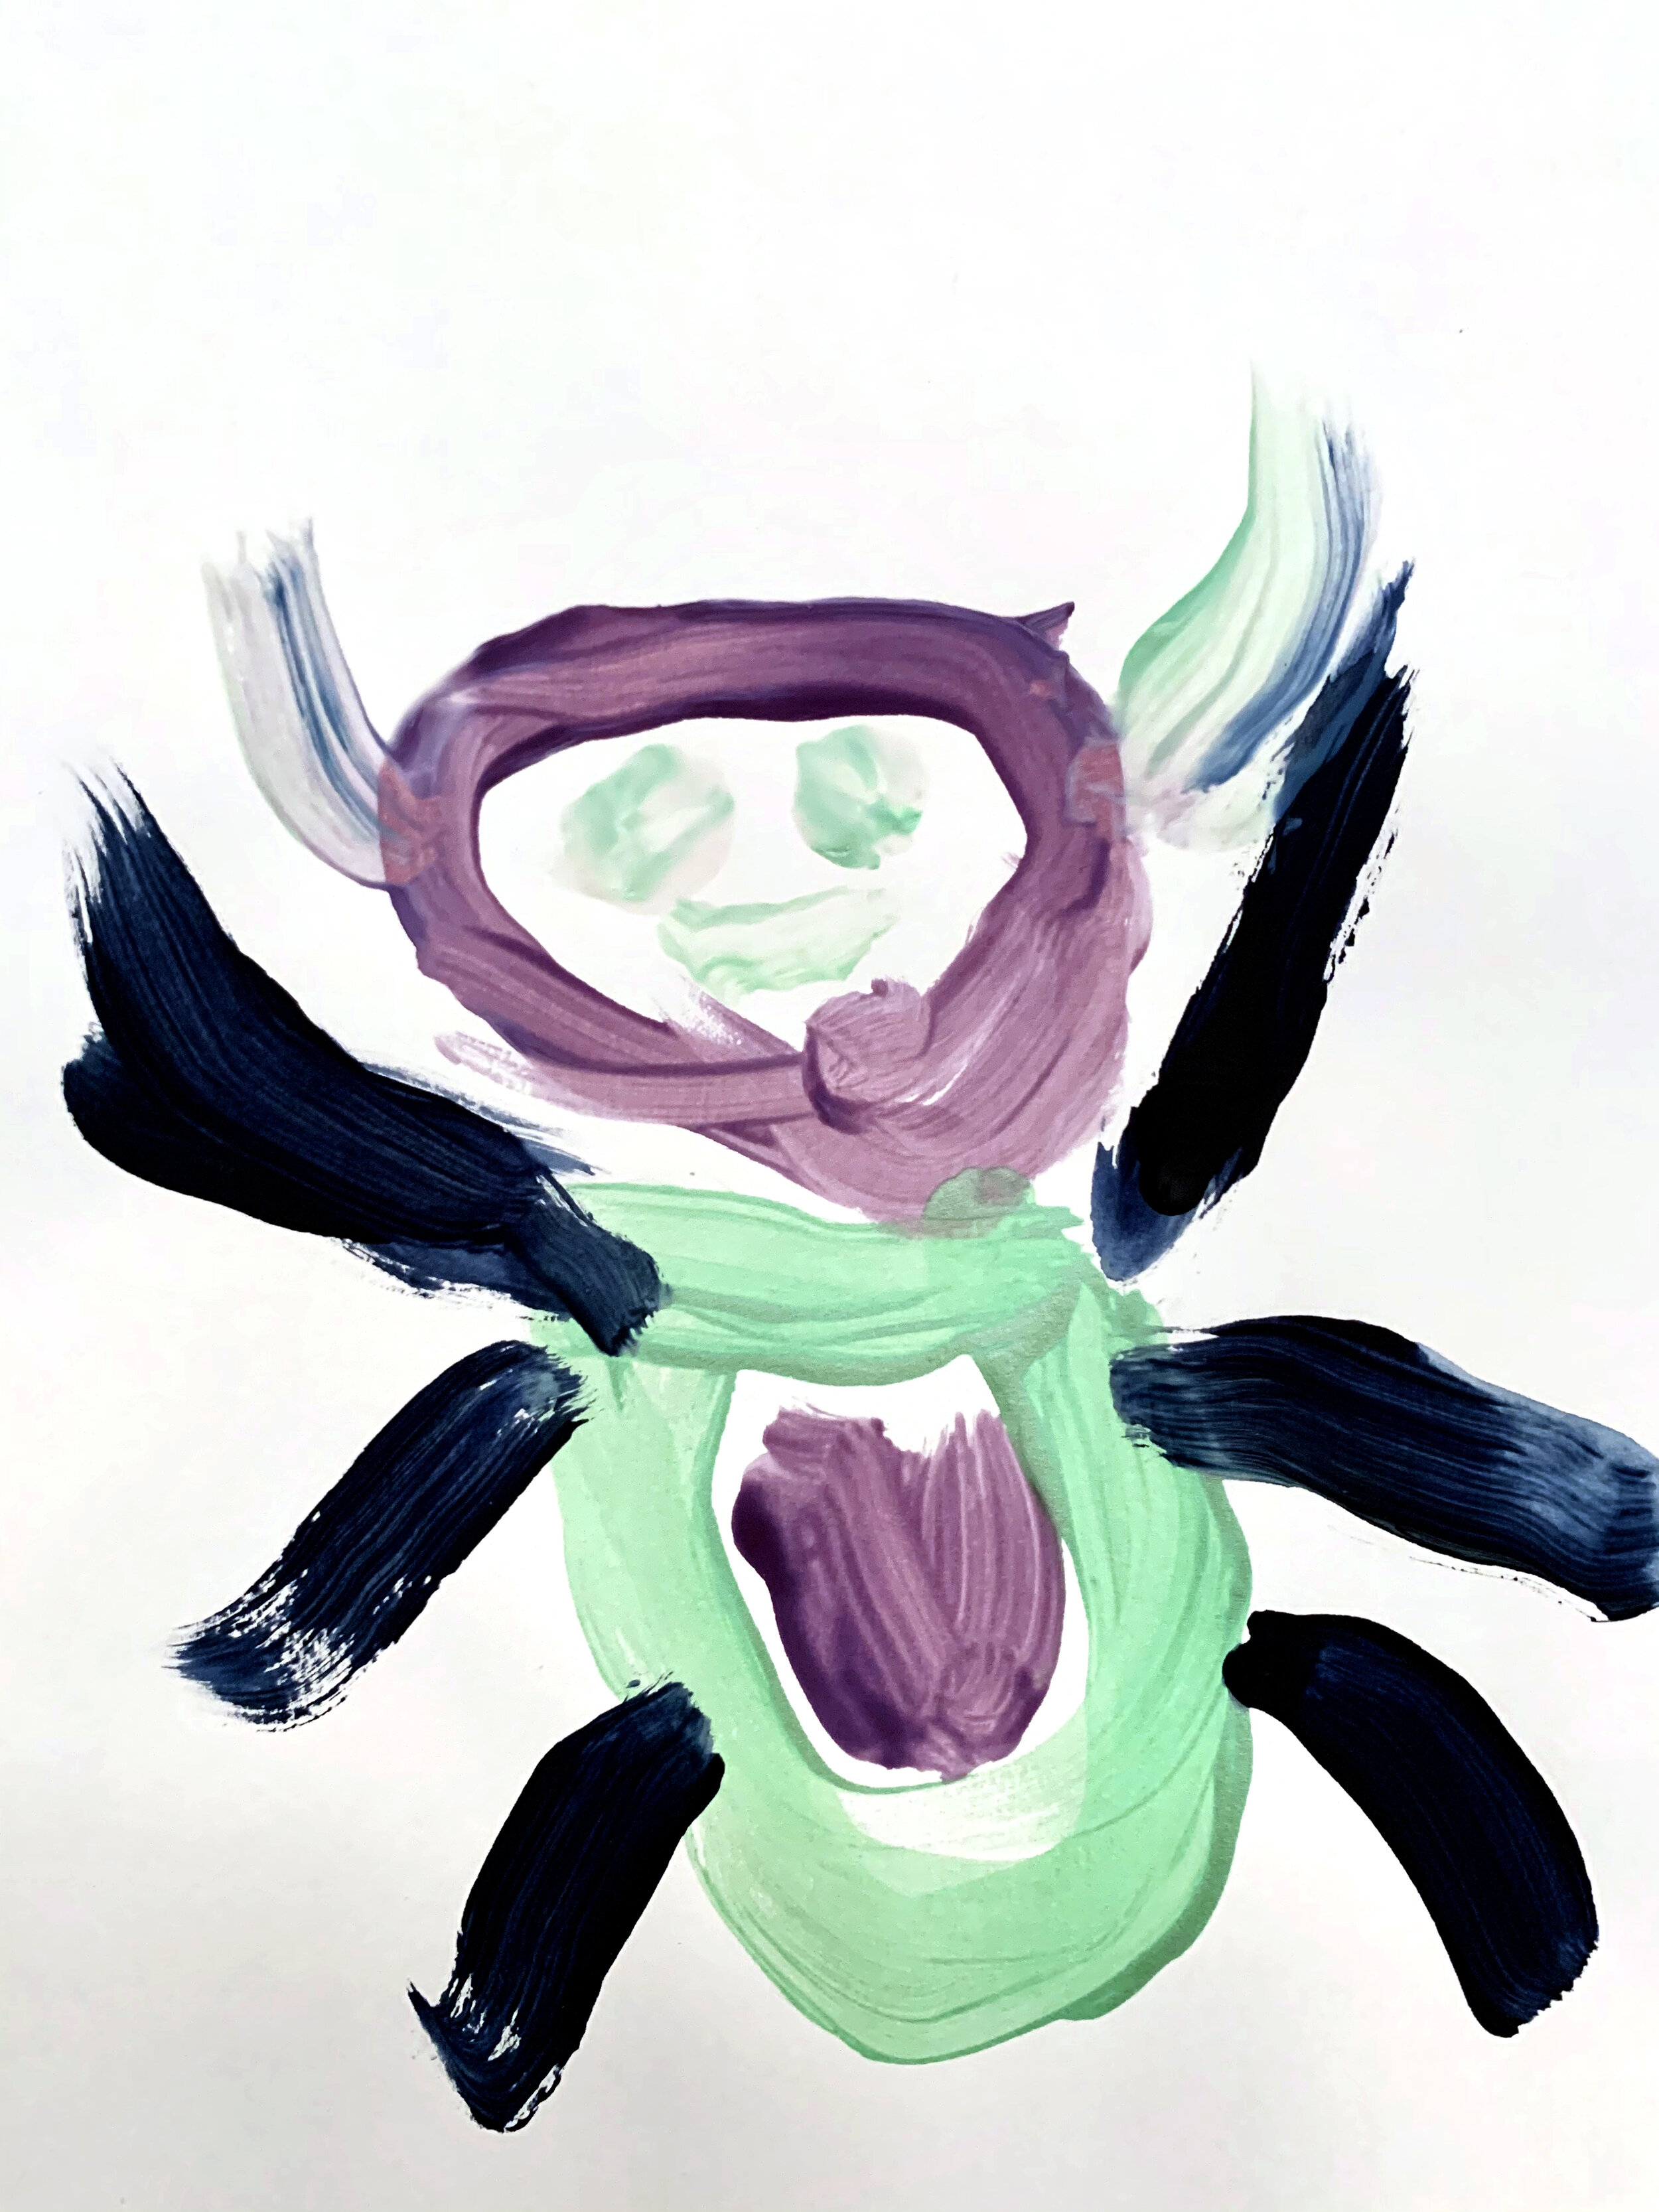 Beetle by Gloria. March 11, 2020. Freehand Painting w/ Tempera